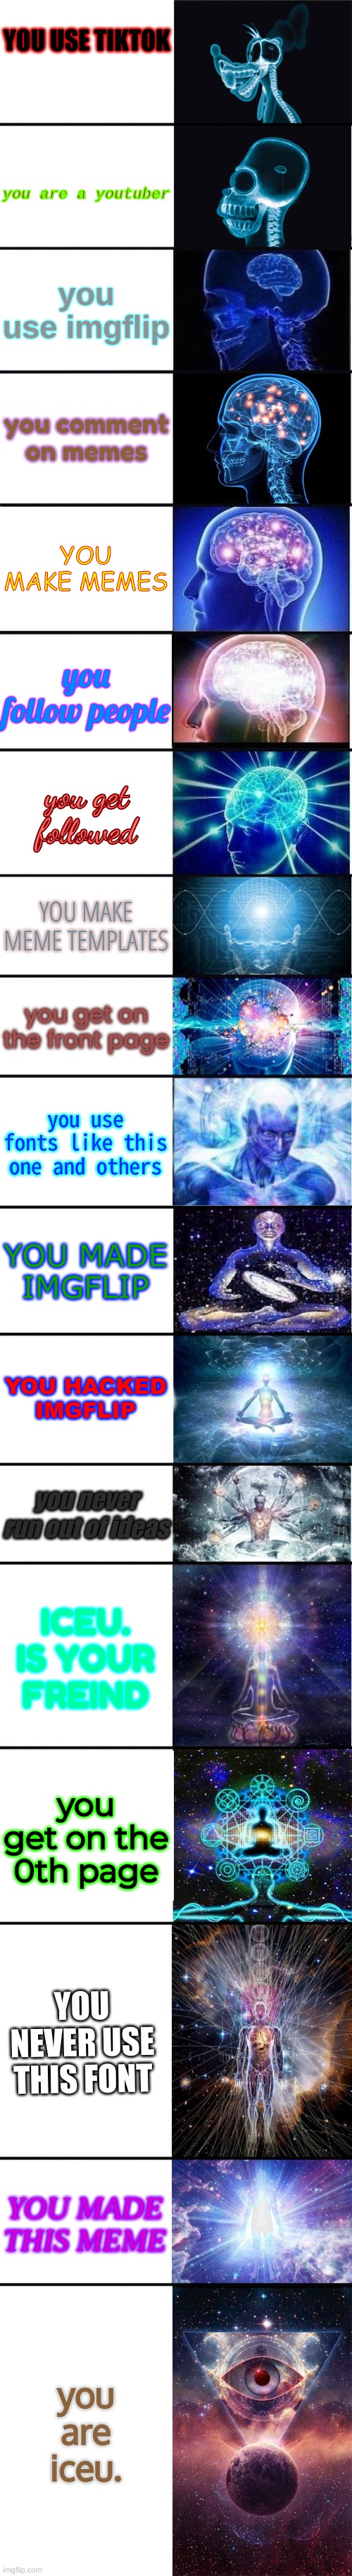 pls i took a long time | YOU USE TIKTOK; you are a youtuber; you use imgflip; you comment on memes; YOU MAKE MEMES; you follow people; you get followed; YOU MAKE MEME TEMPLATES; you get on the front page; you use fonts like this one and others; YOU MADE IMGFLIP; YOU HACKED IMGFLIP; you never run out of ideas; ICEU. IS YOUR FREIND; you get on the 0th page; YOU NEVER USE THIS FONT; YOU MADE THIS MEME; you are iceu. | image tagged in expanding brain 9001,pls,memes | made w/ Imgflip meme maker